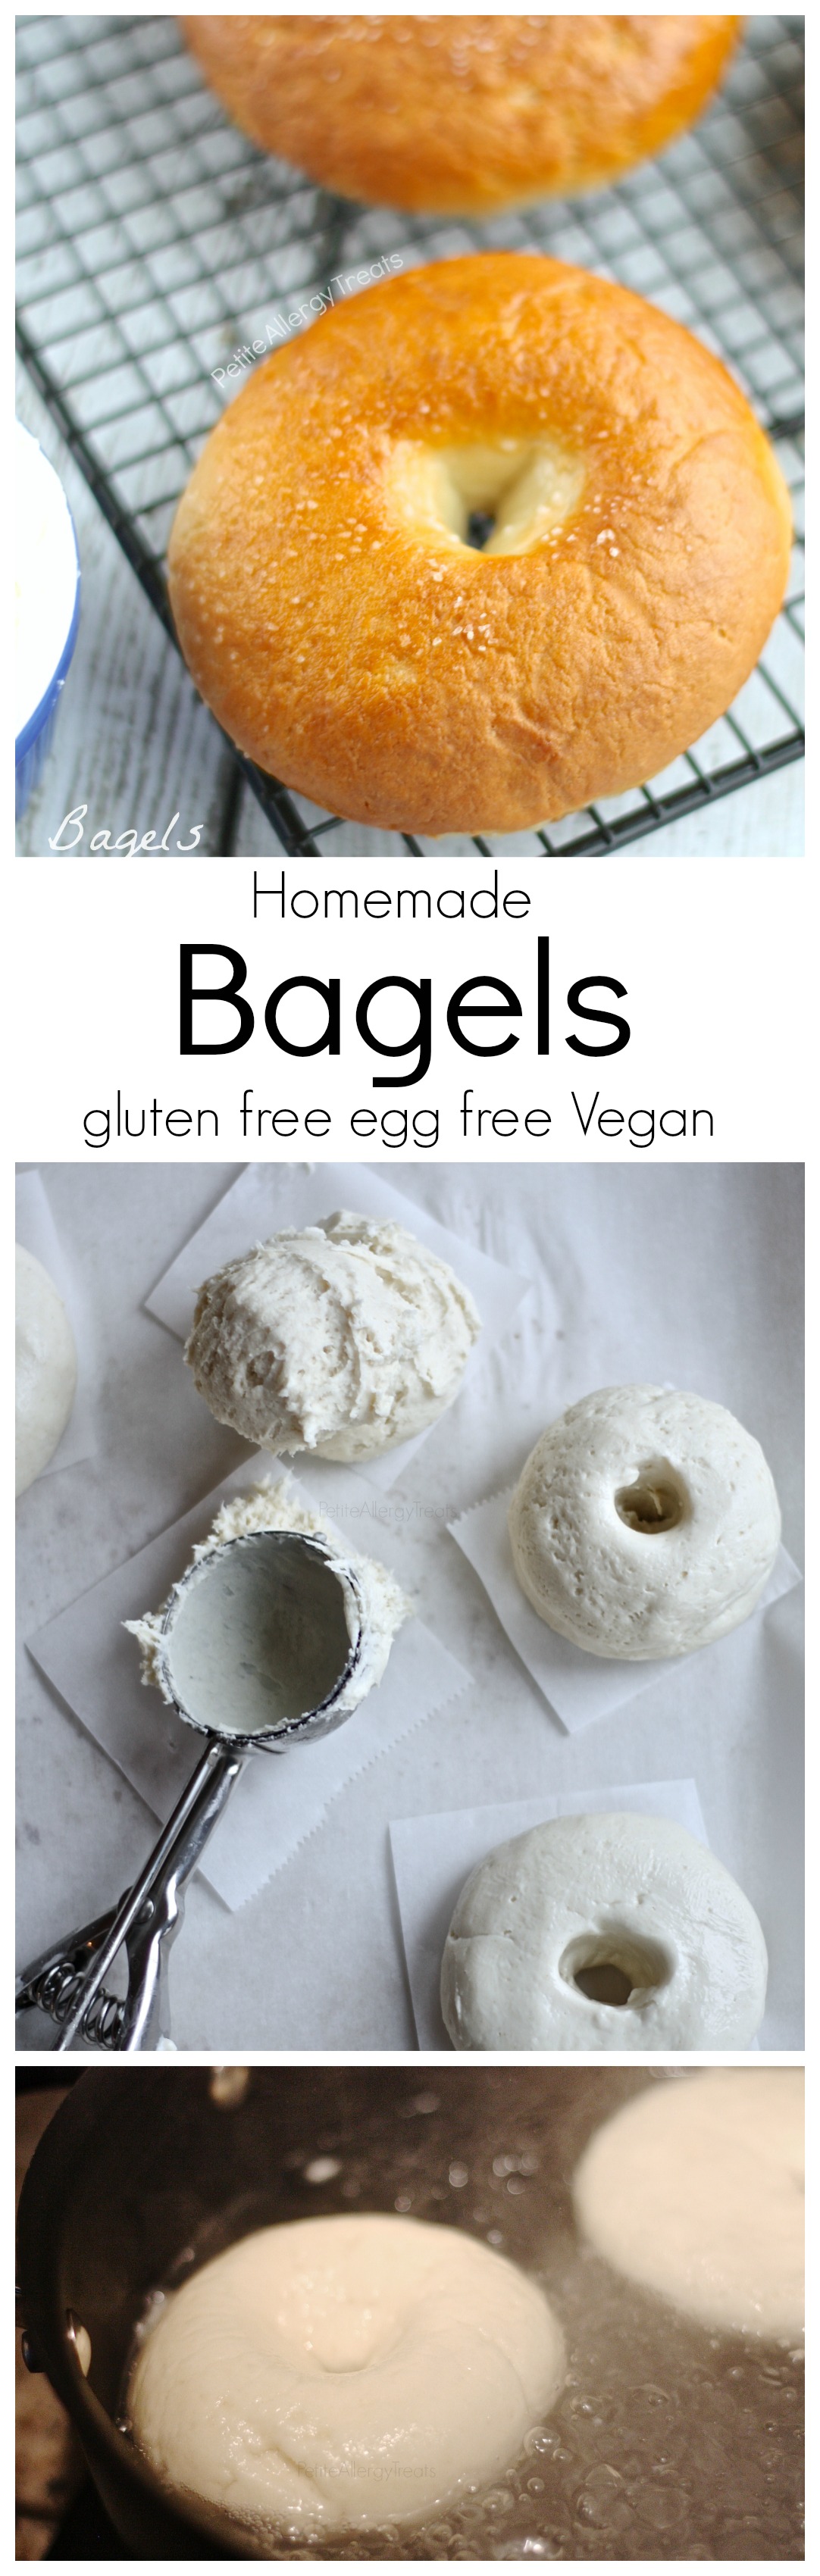 Gluten Free Bagels (Vegan Egg Free)- Chewy and dense, you'll never know these bagels are gluten free and egg free. PetiteAllergyTreats